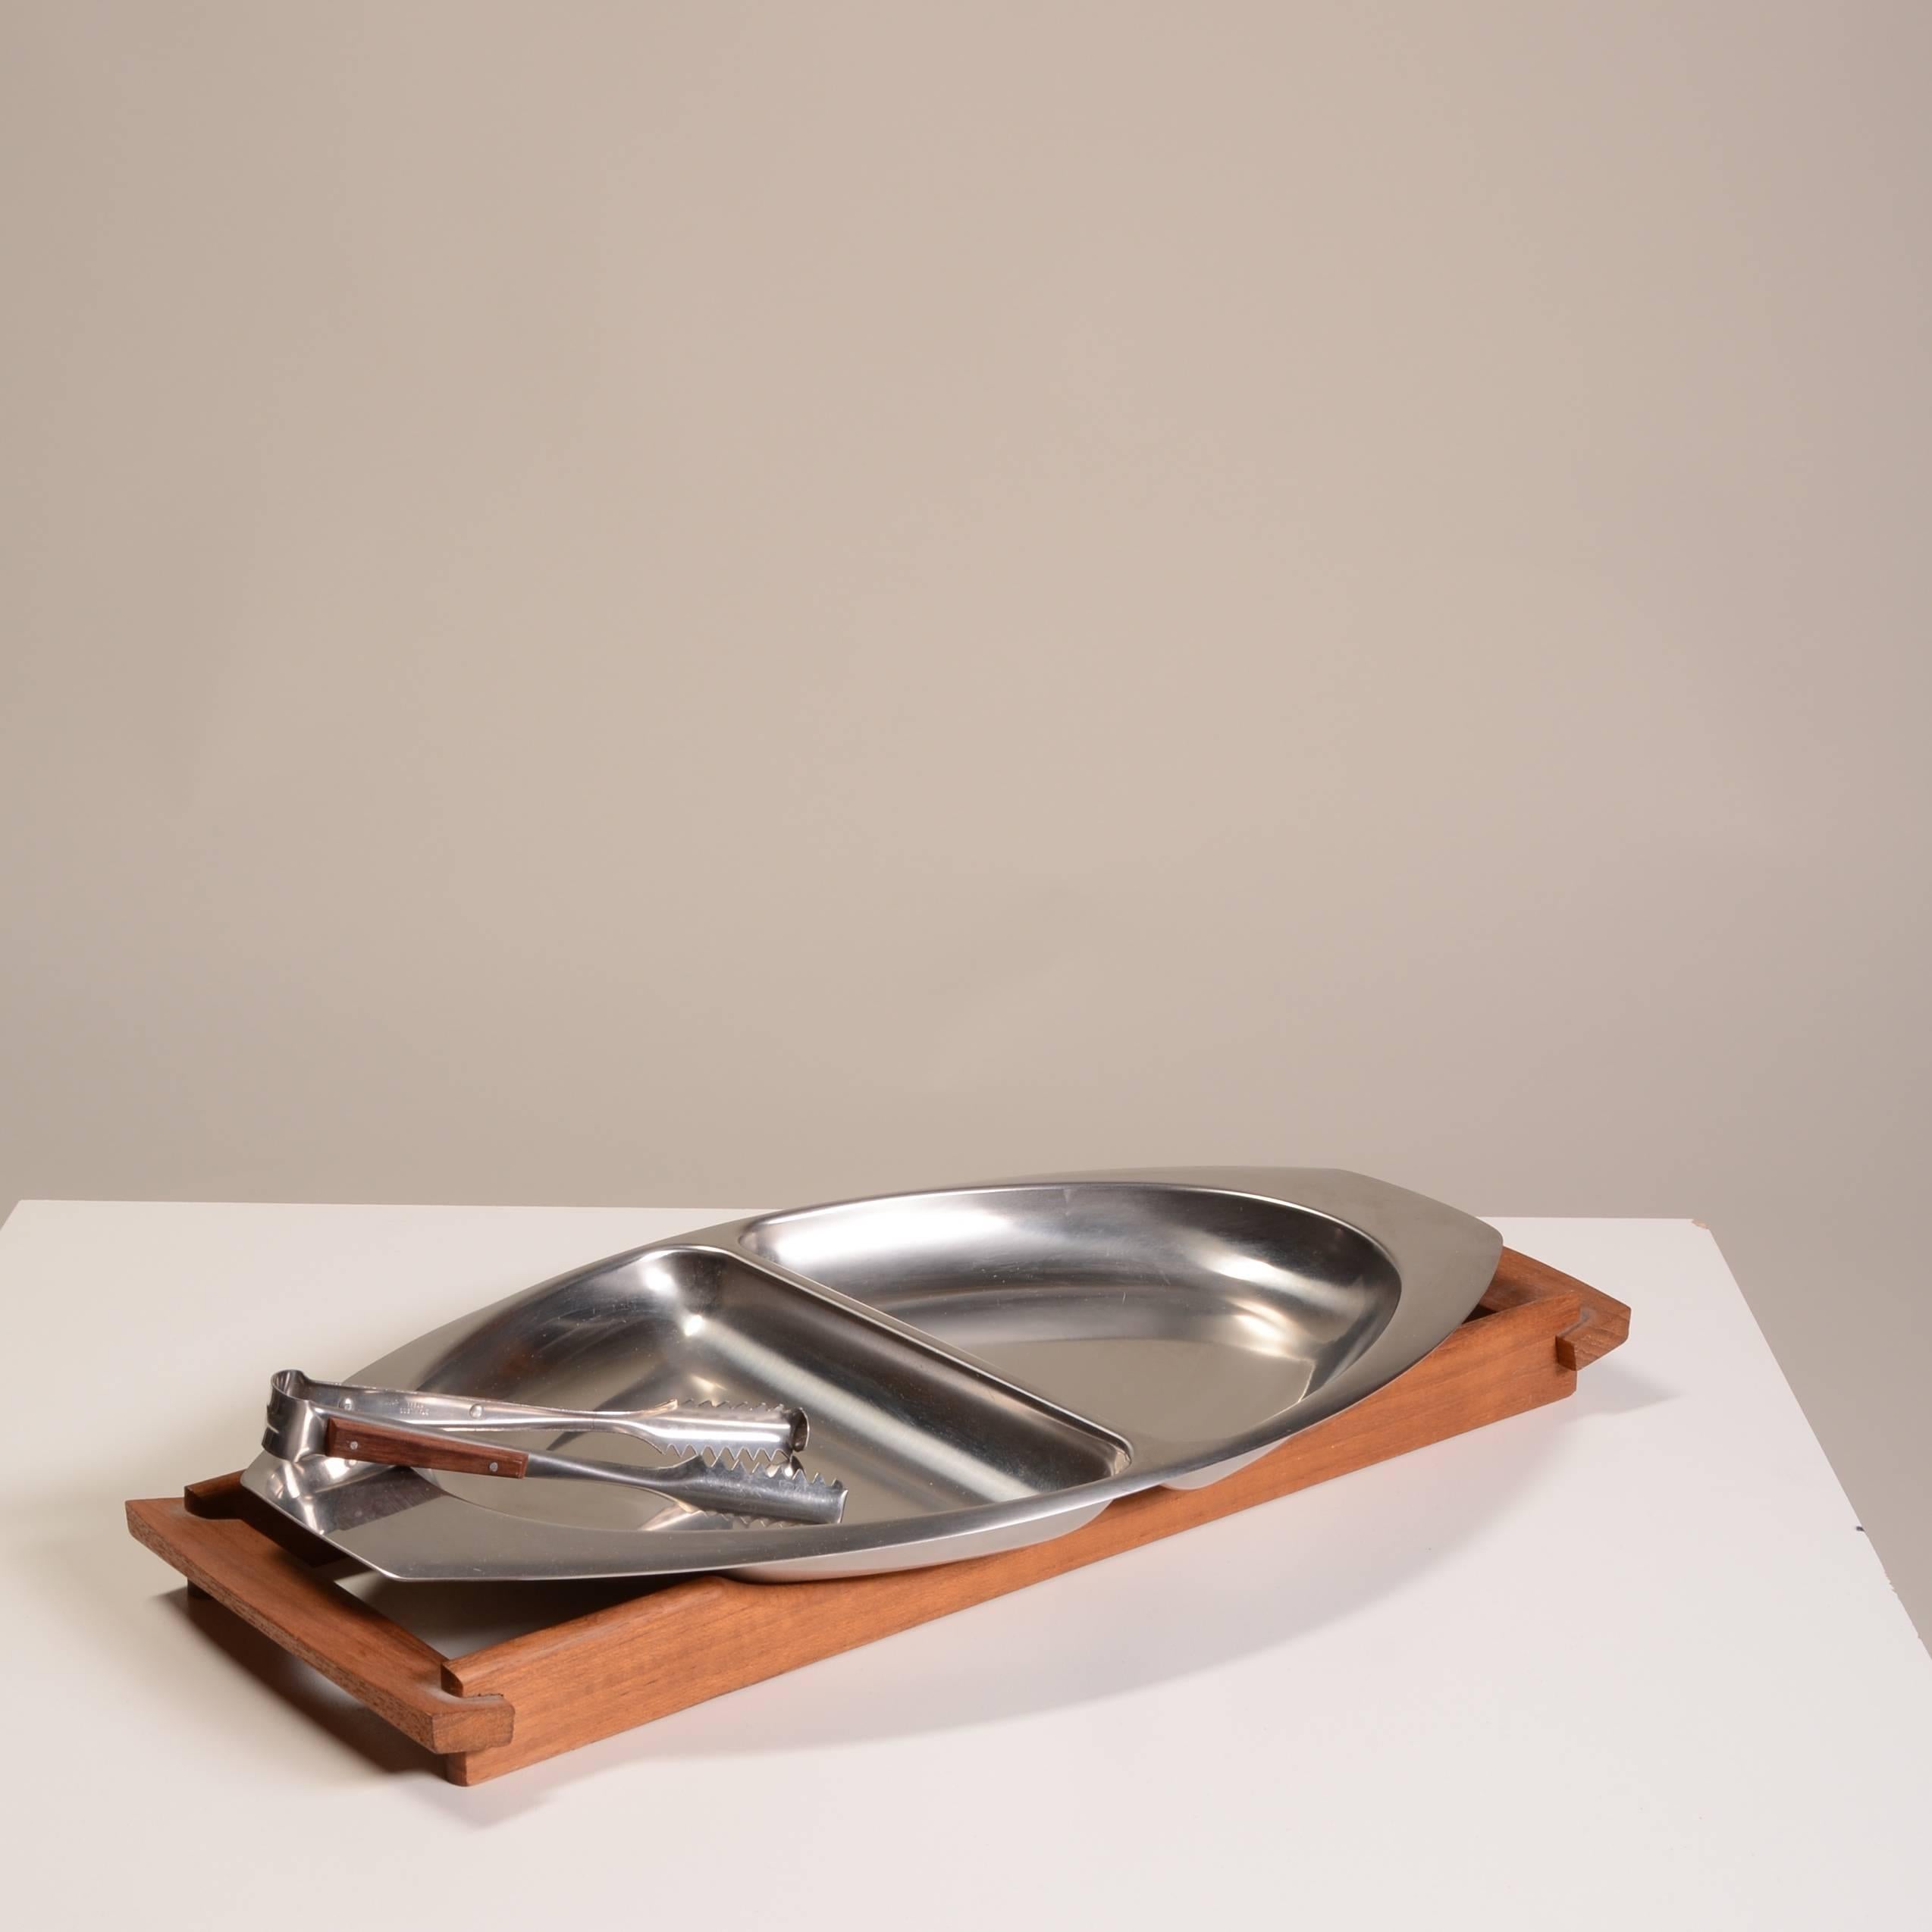 Vintage Mid-Century Modern Danish modern Kalmar designs three-piece stainless steel and teak serving tray.

Three pieces include one large divided serving tray, accompanied by a teak base and serving thong. Think festive entertaining and a mix of